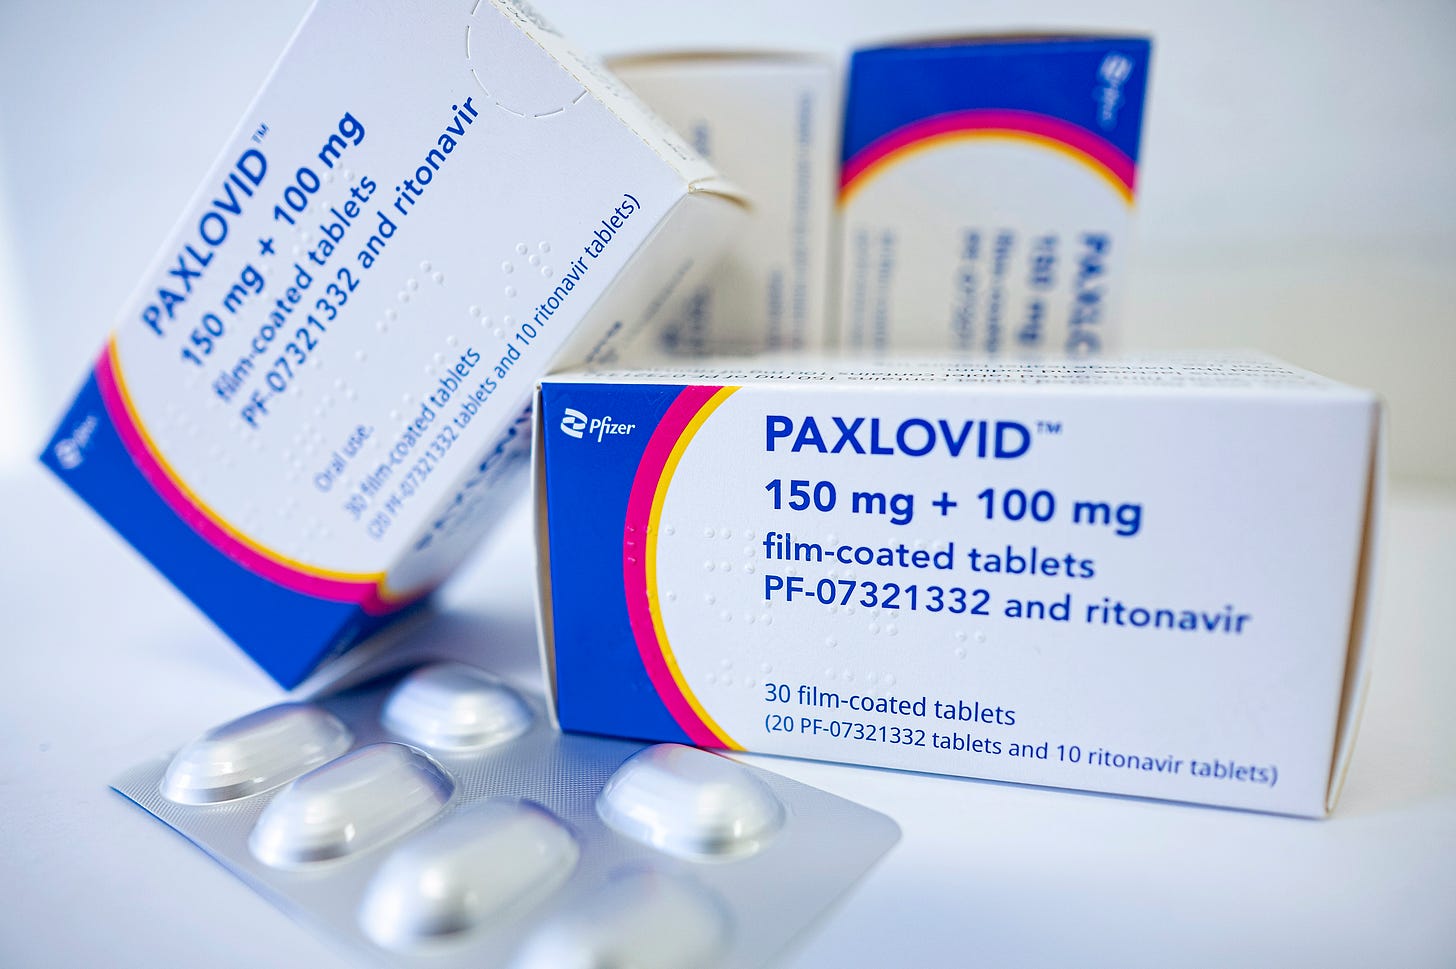 CDC warns of 'Covid-19 rebound' after taking Paxlovid ...